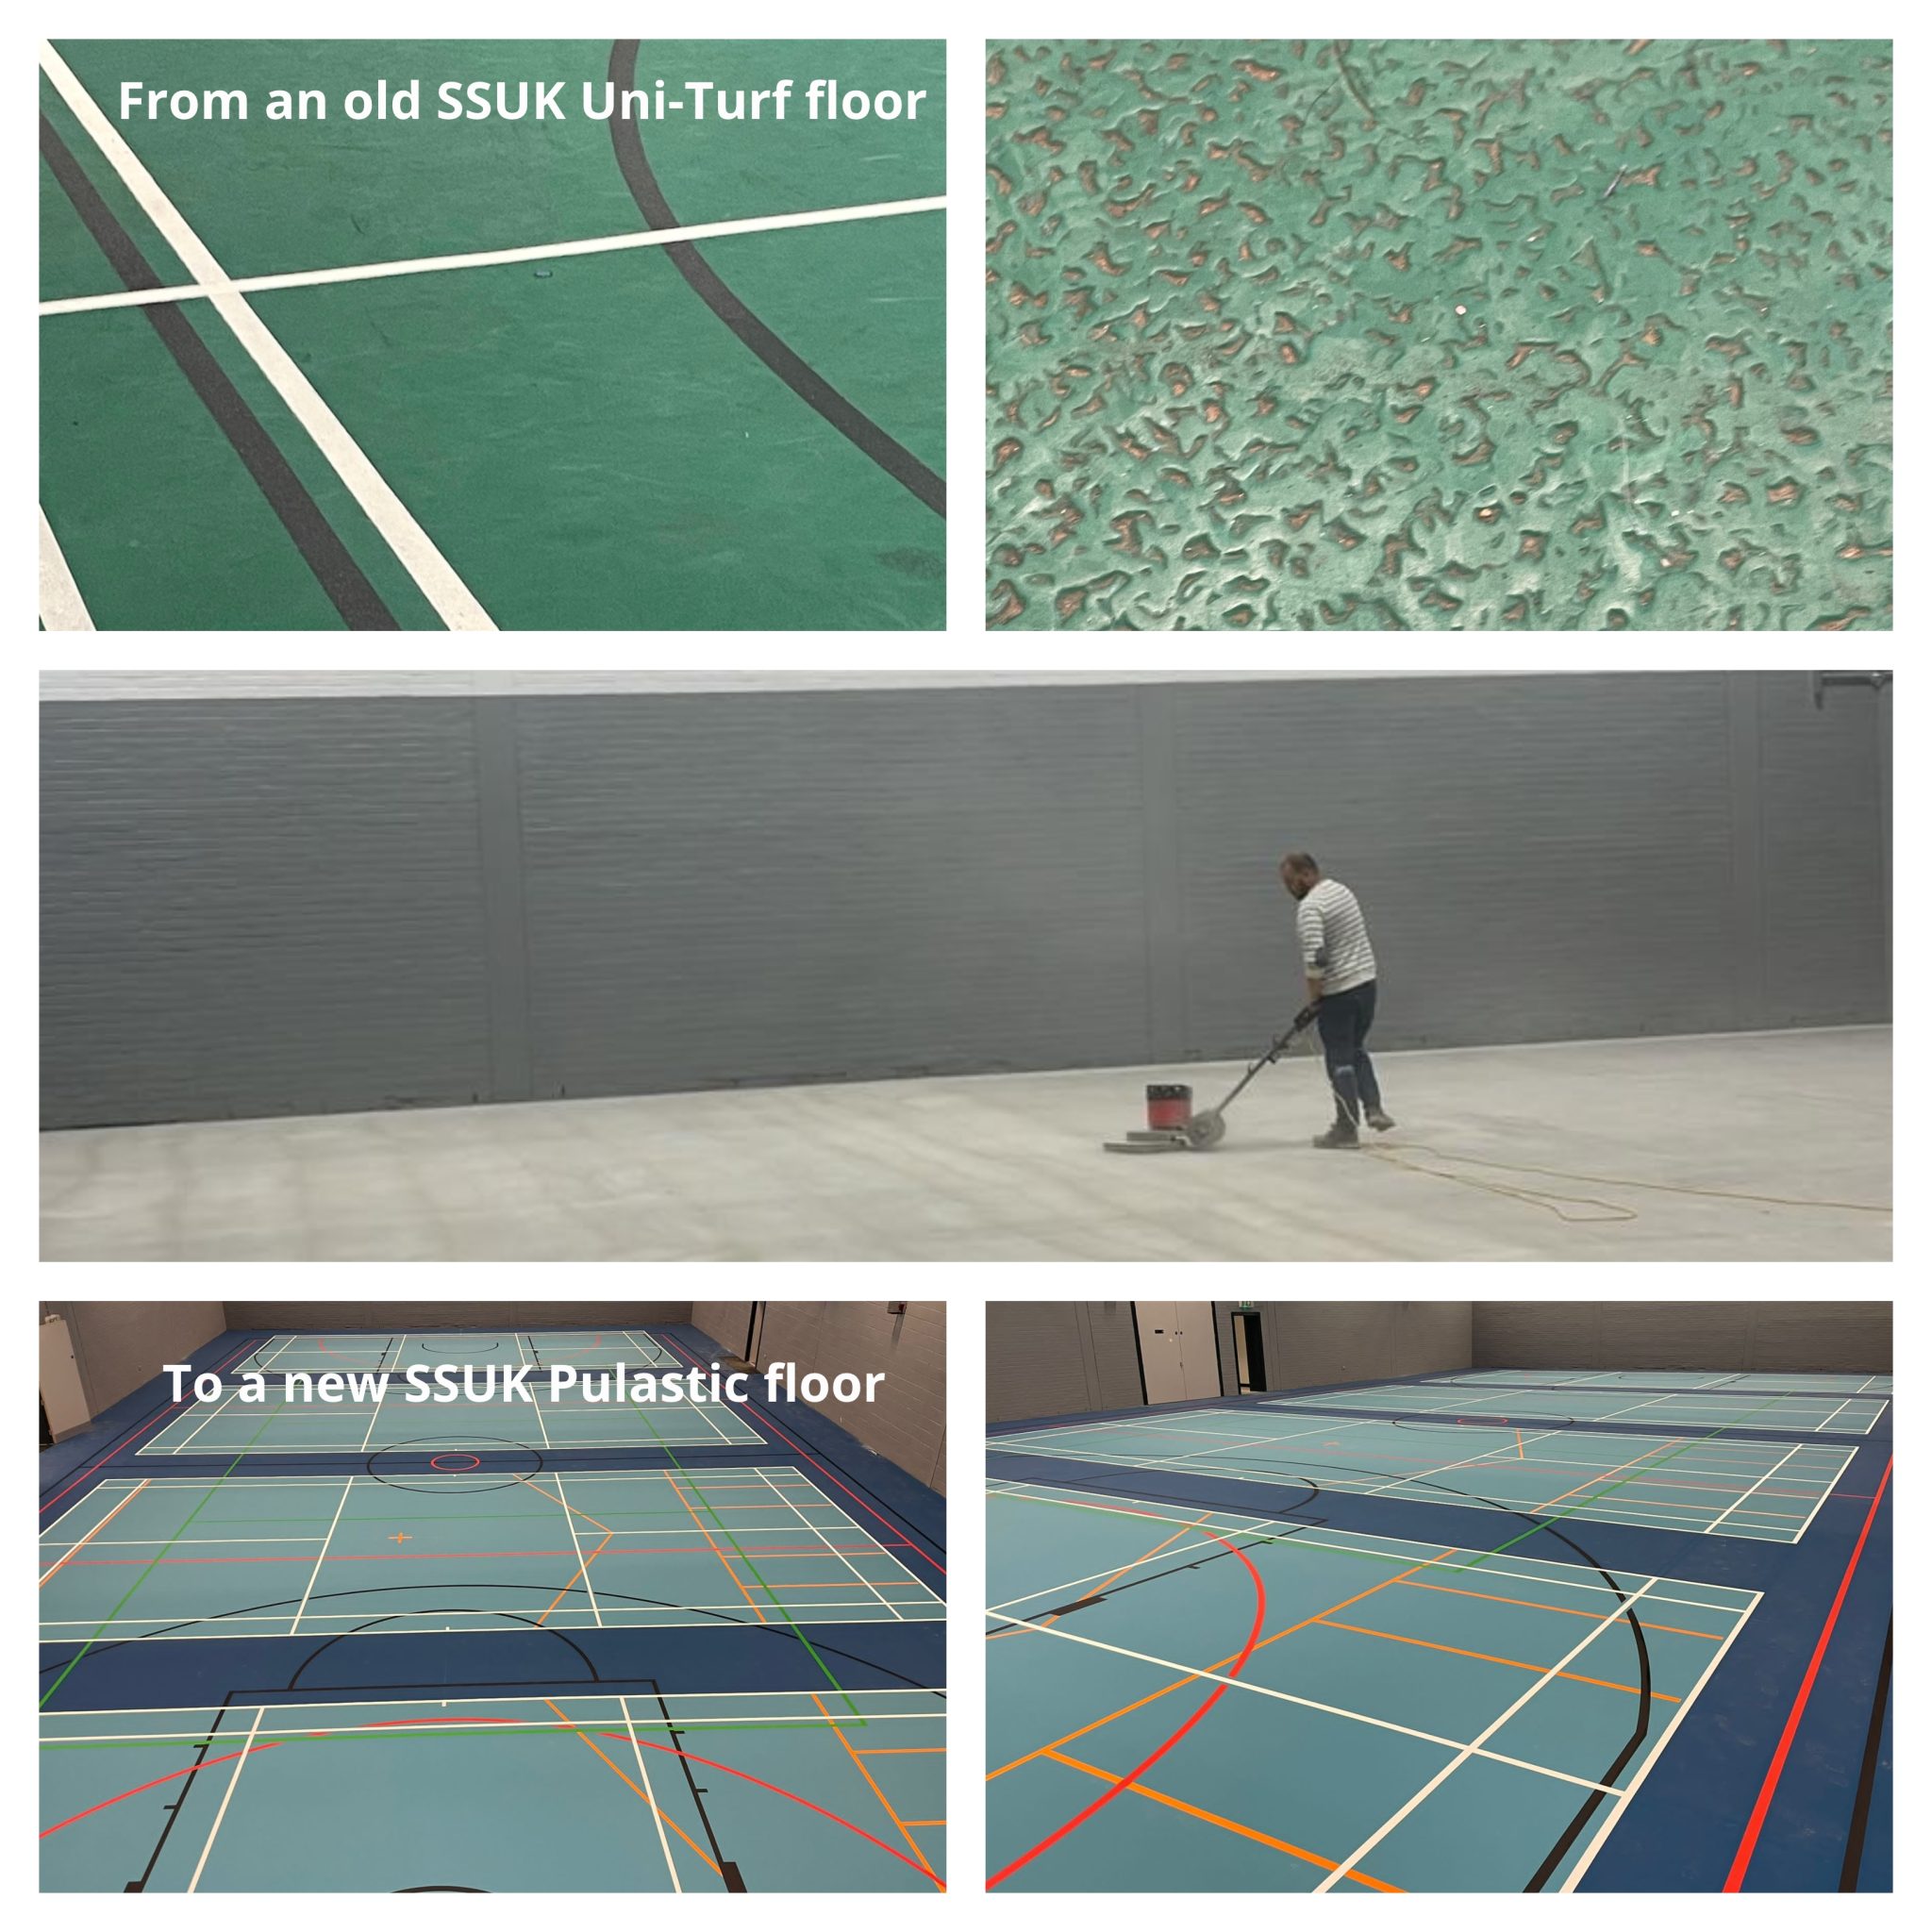 Pulastic indoor sports floor over an old Uni-Turf sports surface